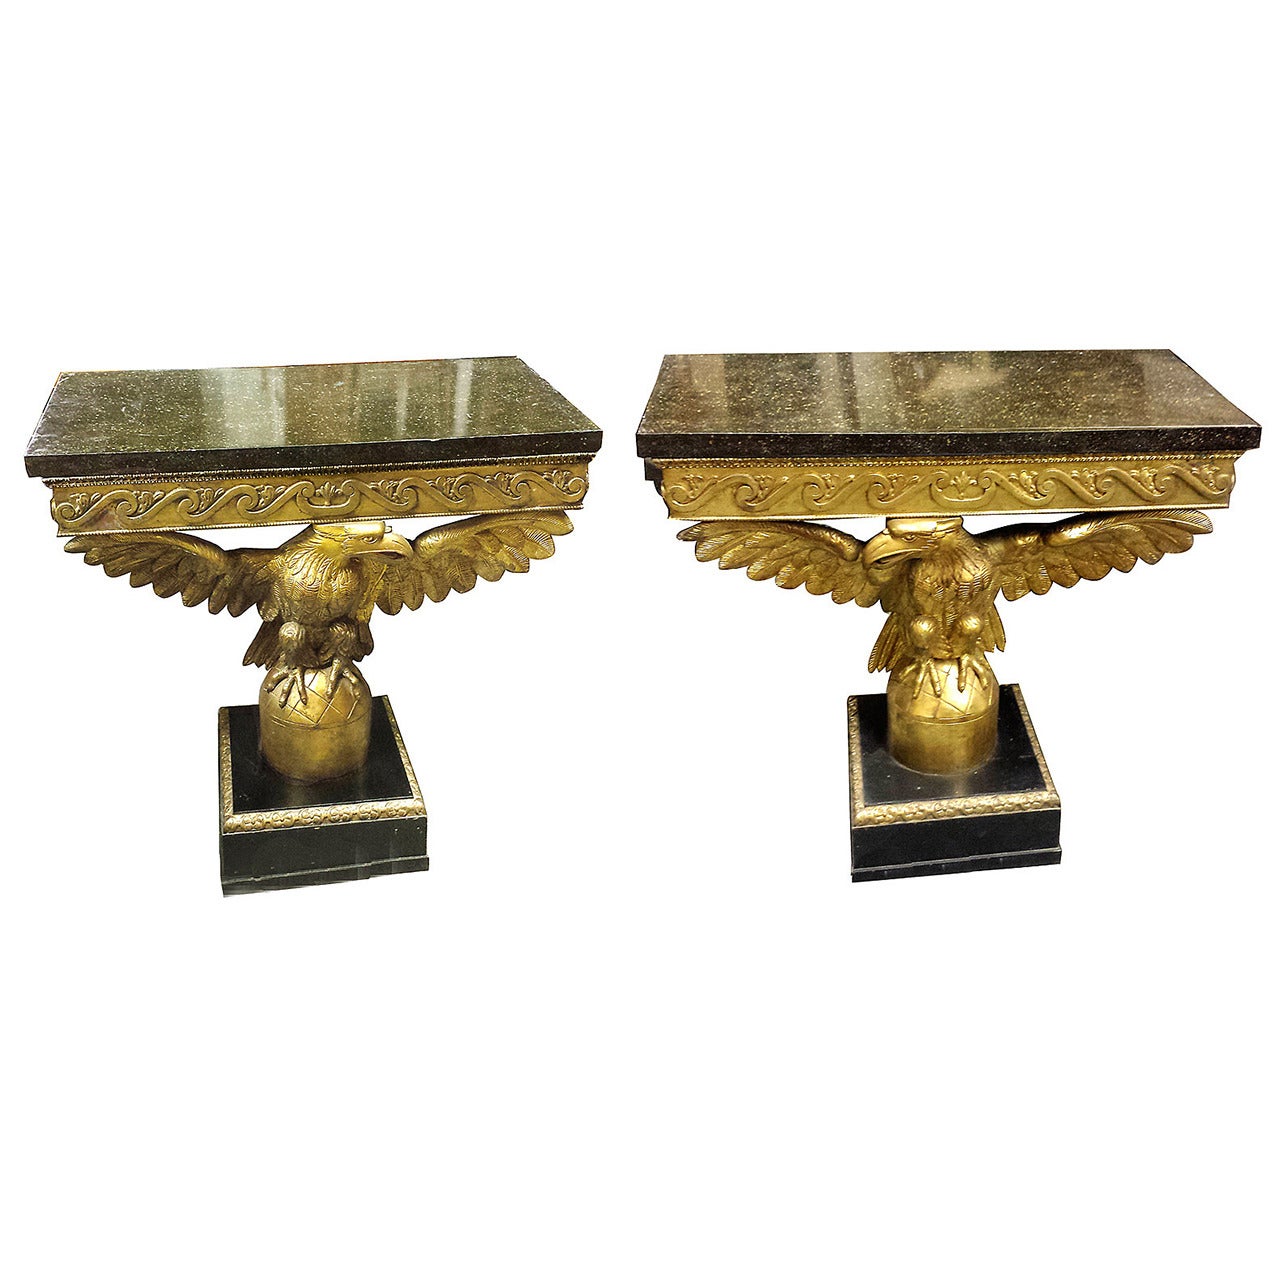 Pair of Georgian Style Giltwood Eagle Consoles